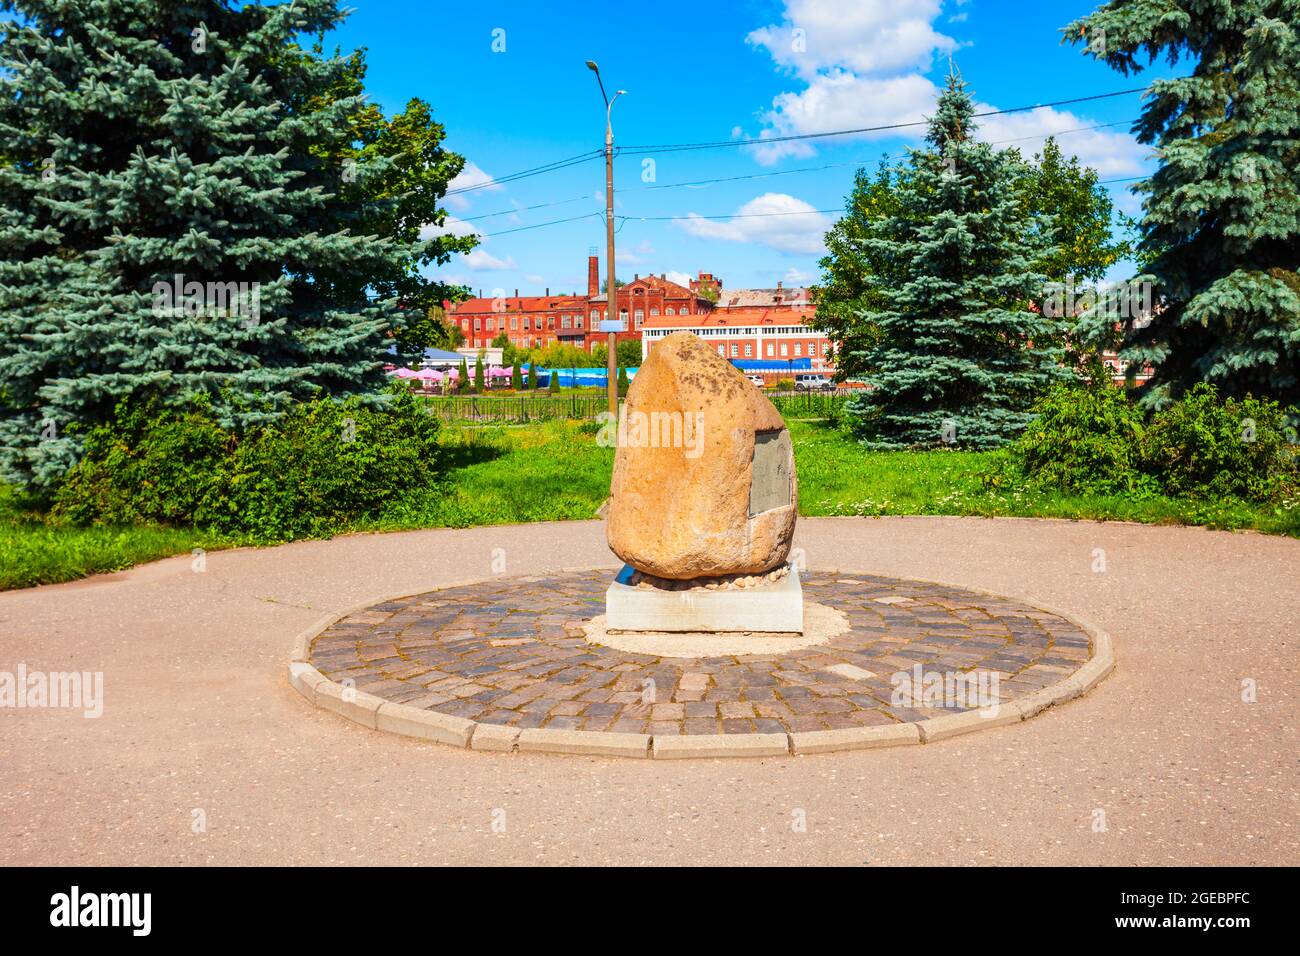 Pushkin memorable stone in the centre of Ivanovo city, Golden Ring of Russia. Pushkin is a great russian poet. Stock Photo